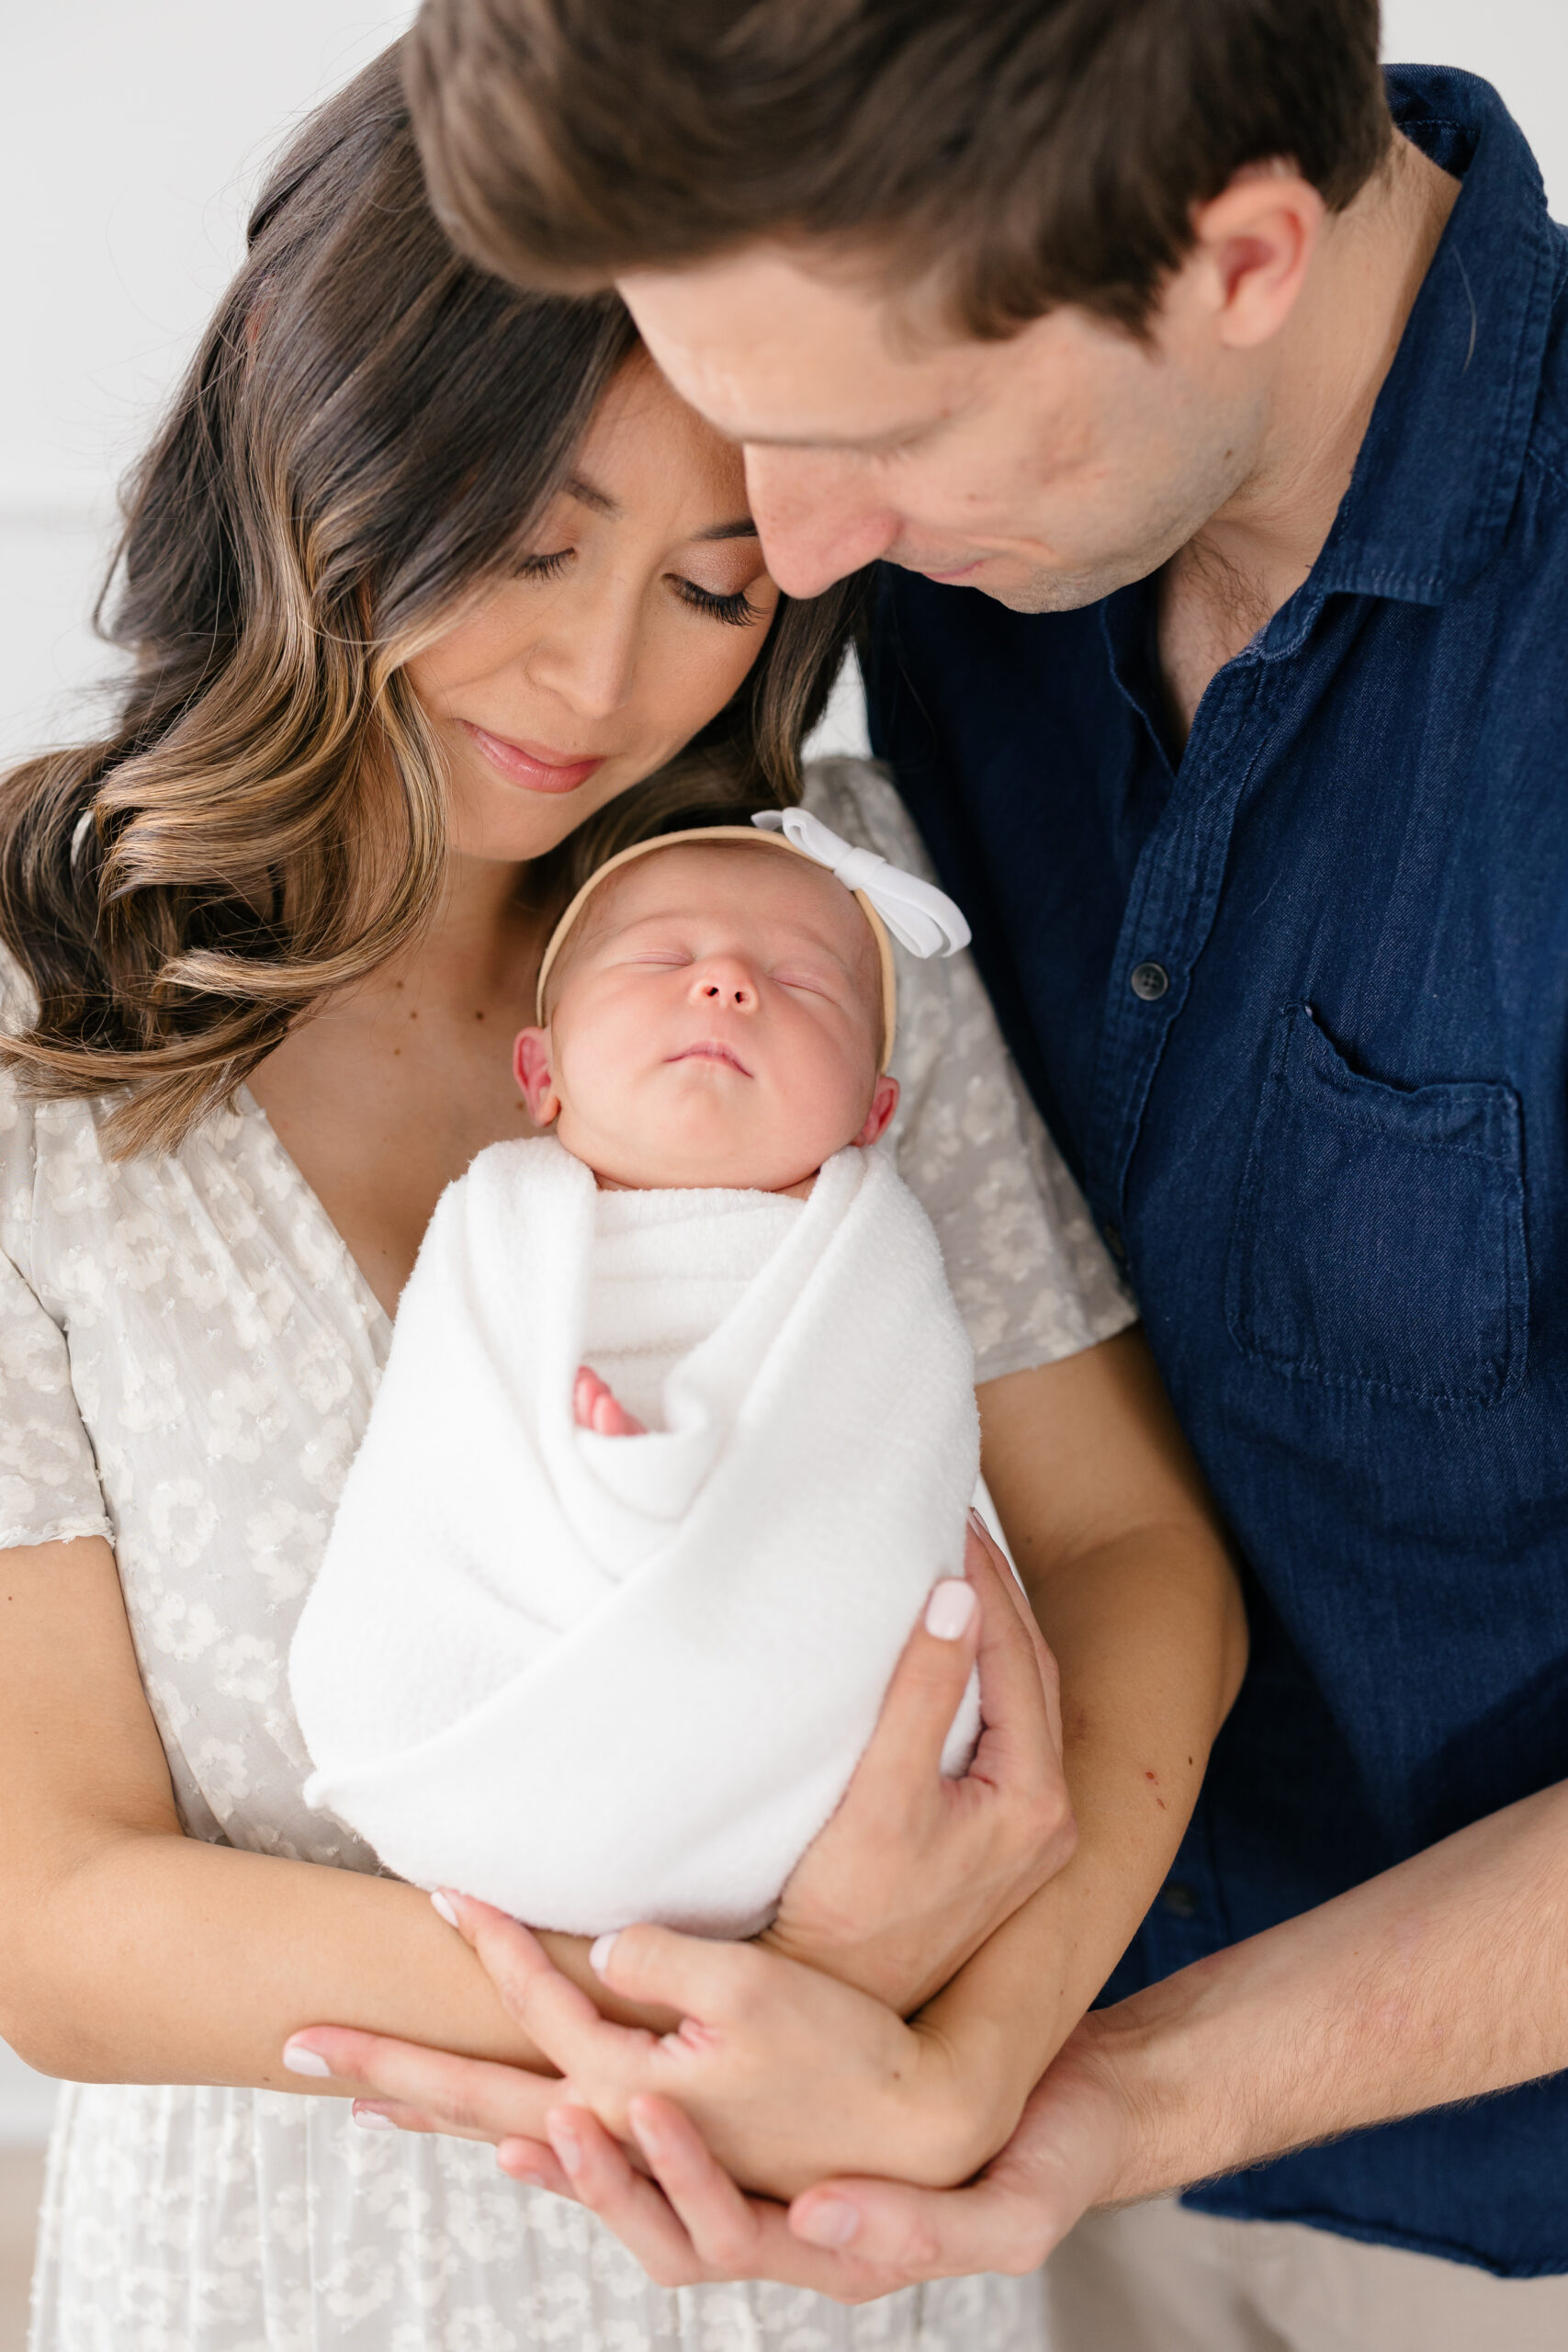 New mom and dad snuggling their sleeping baby girl who is wrapped in a white swaddle